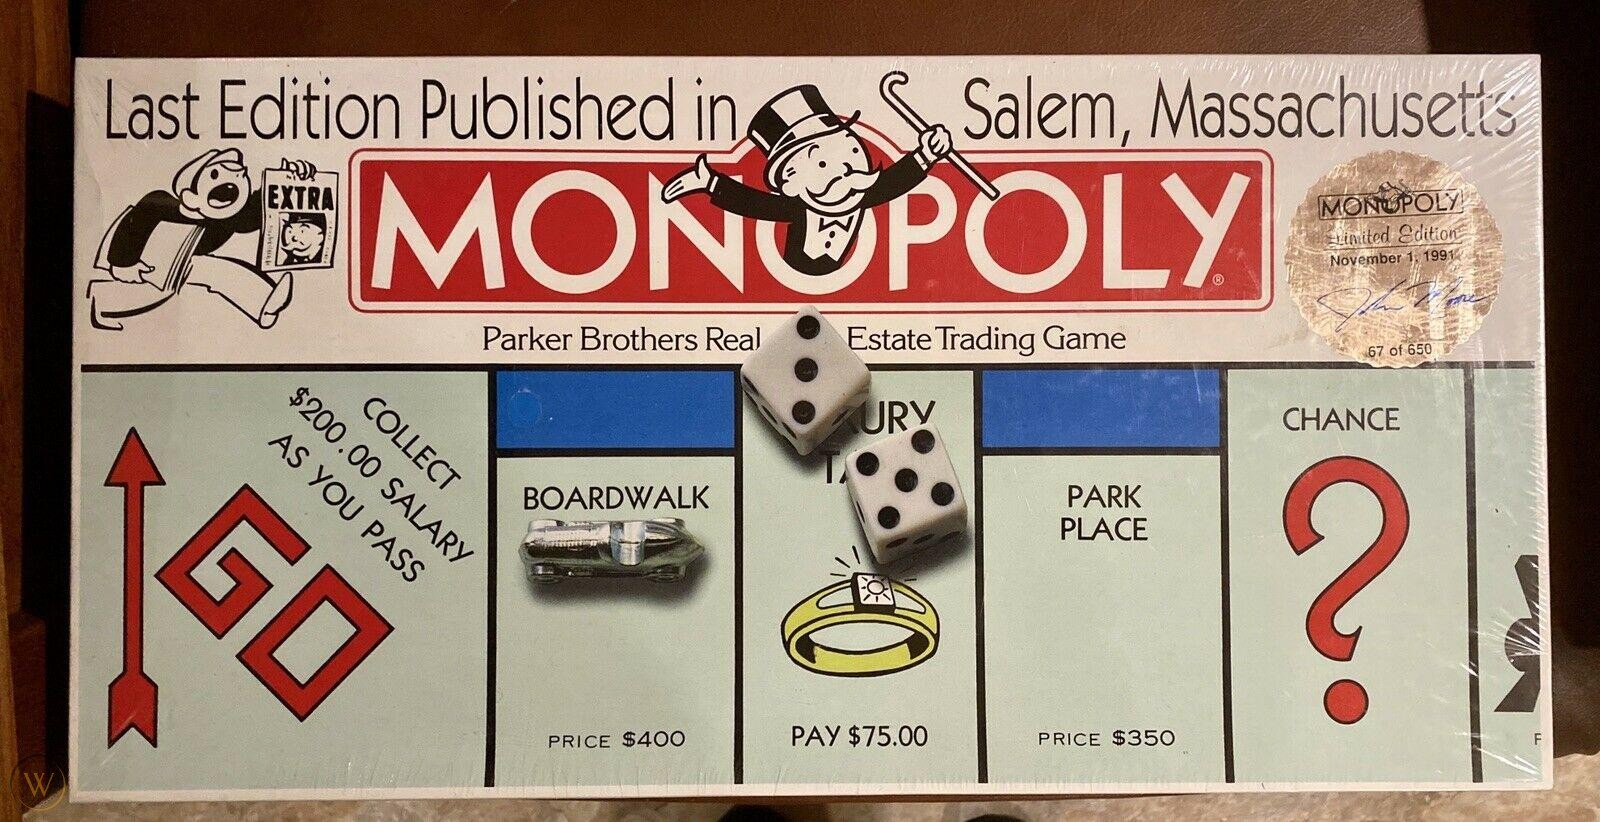 Monopoly game 67 650 given remaining 1 7afc34db4c0bb50baf561c22223b6c3d